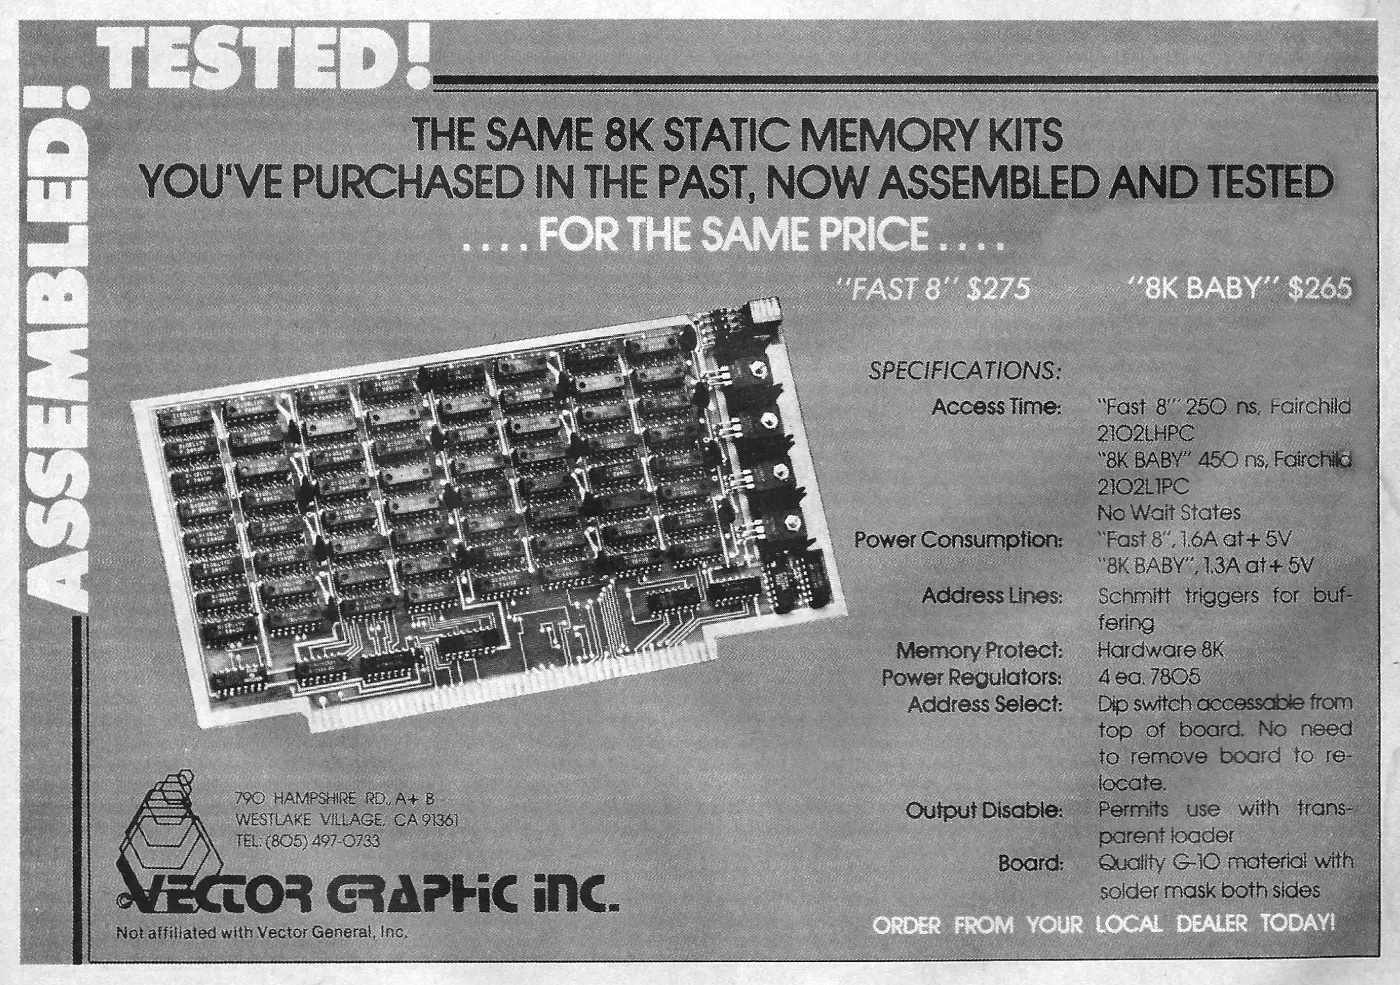 Vector Graphic Advert: <b>Vector Graphic Inc.: Assembled! Tested! The same 8K static memory for the same price!</b>, from Byte - The Small Systems Journal, July 1977